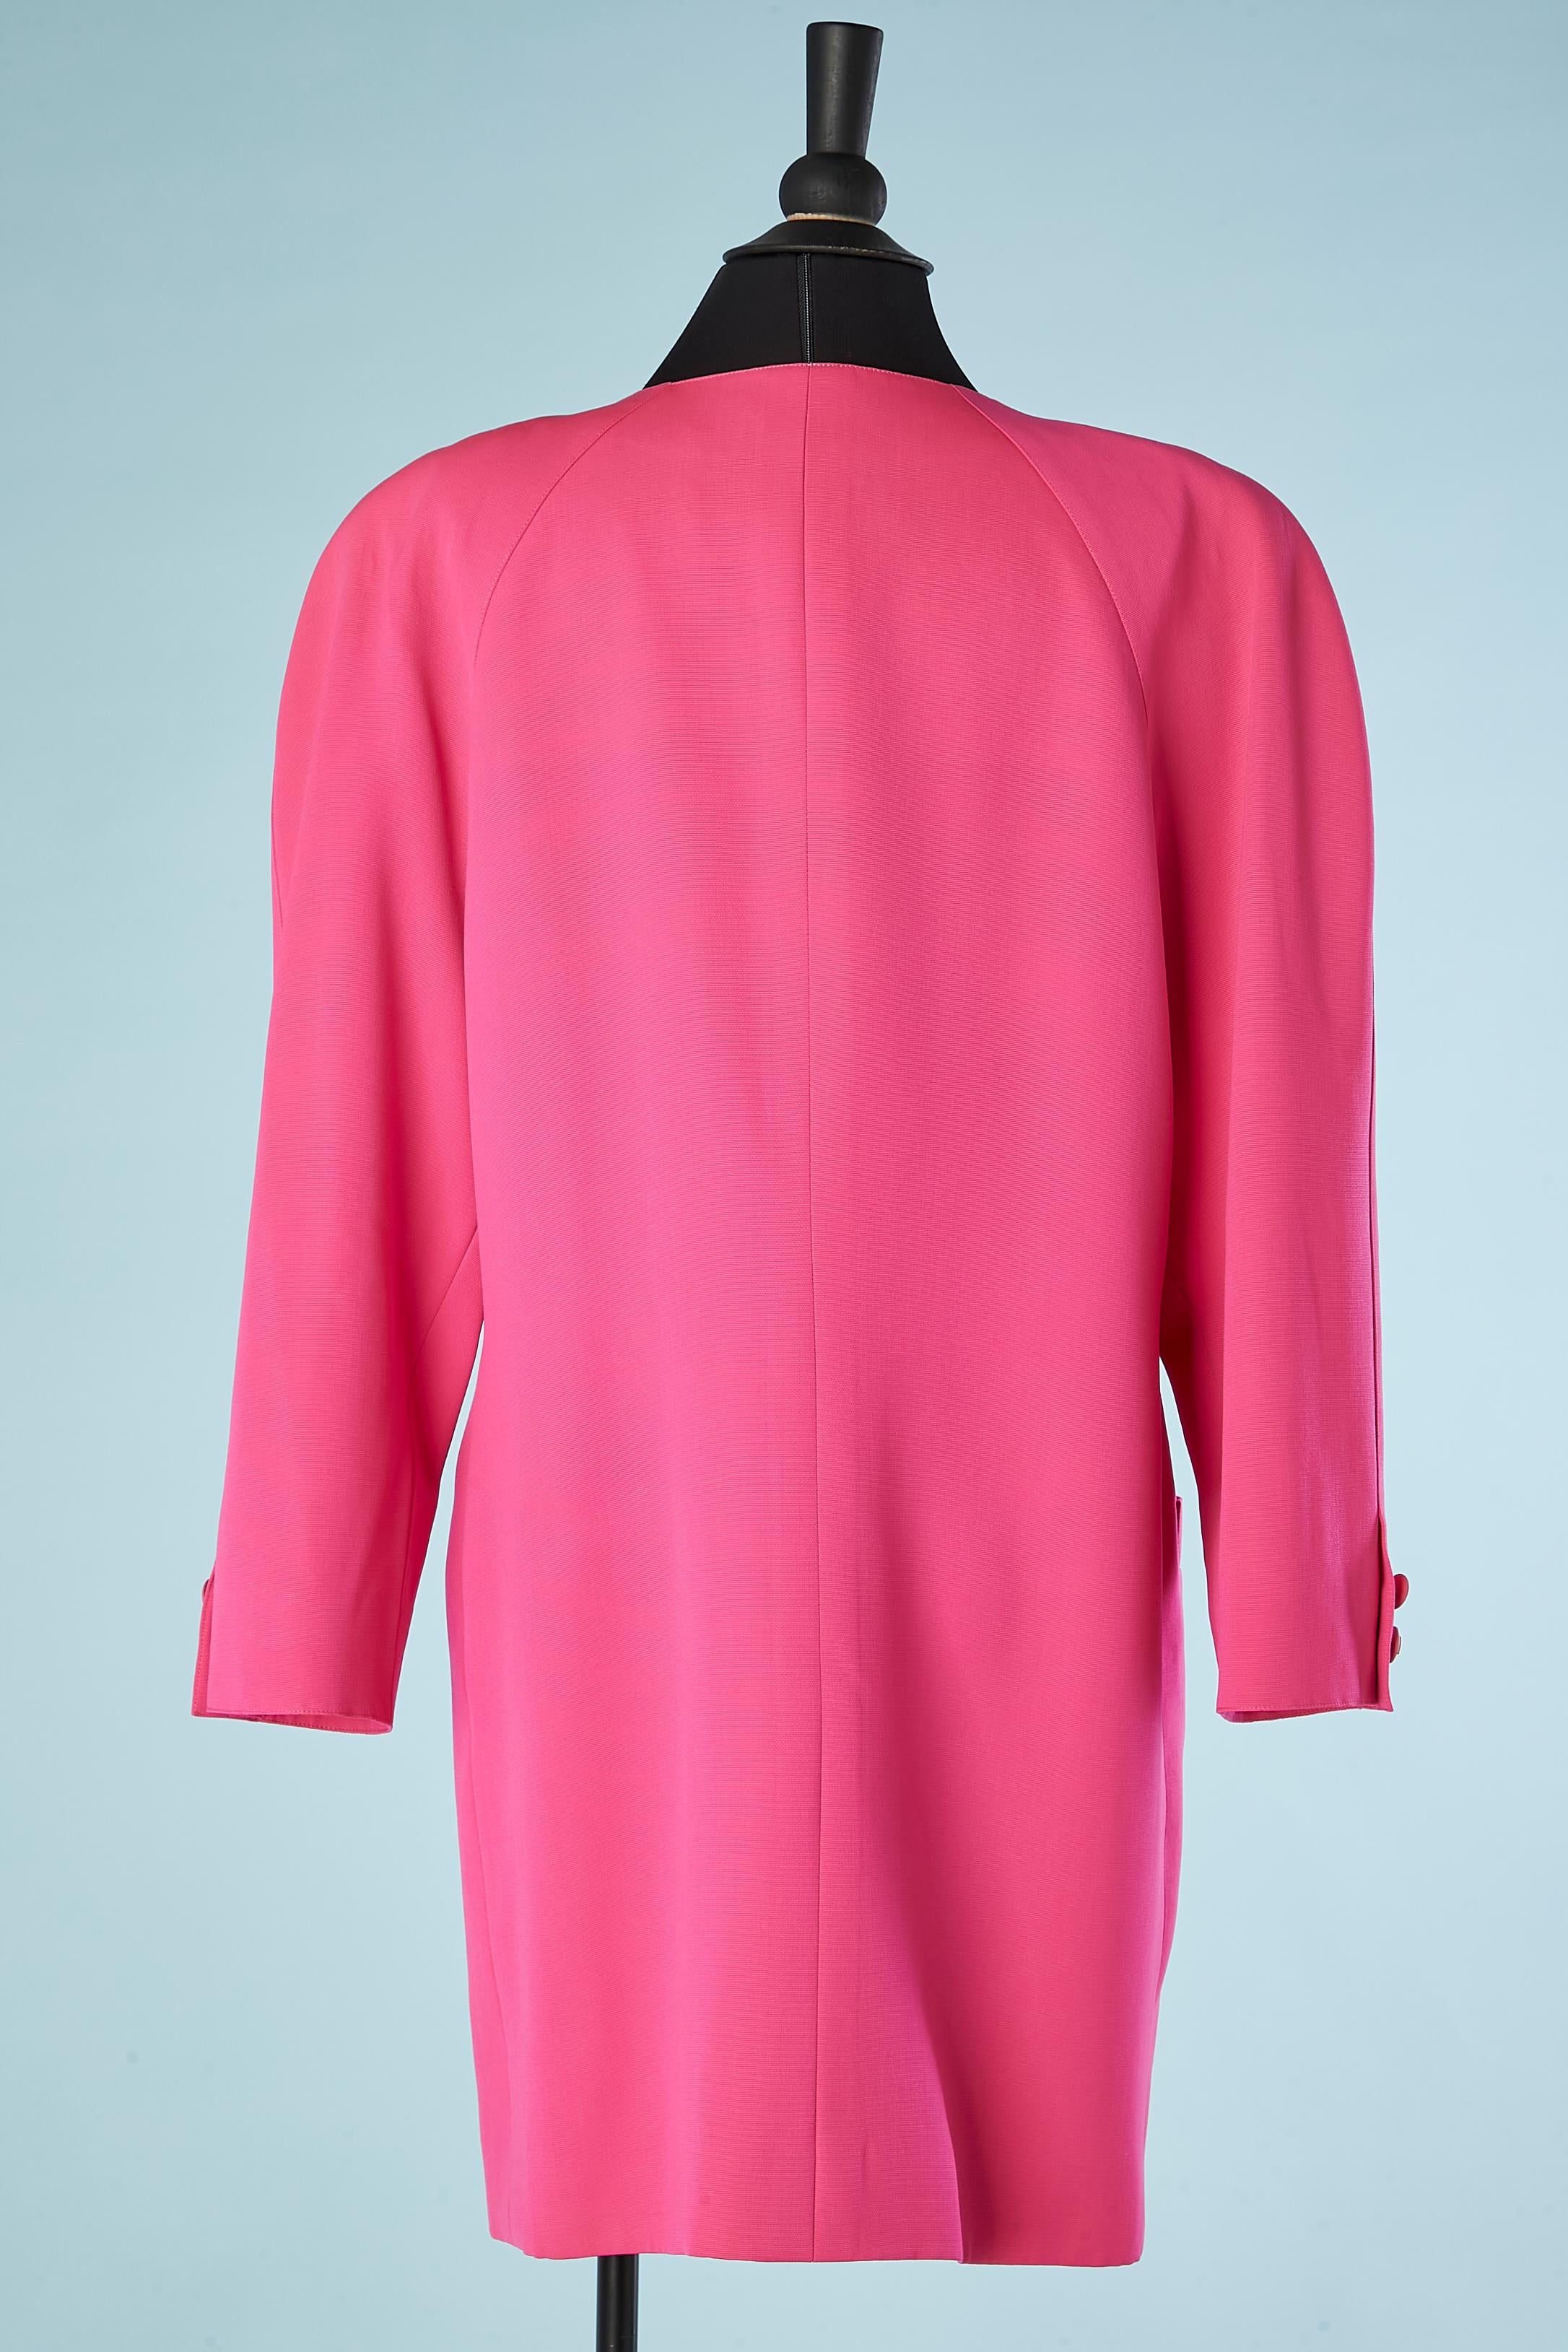 Single-waisted pink cocktail jacket with branded button Scherrer Boutique  For Sale 1